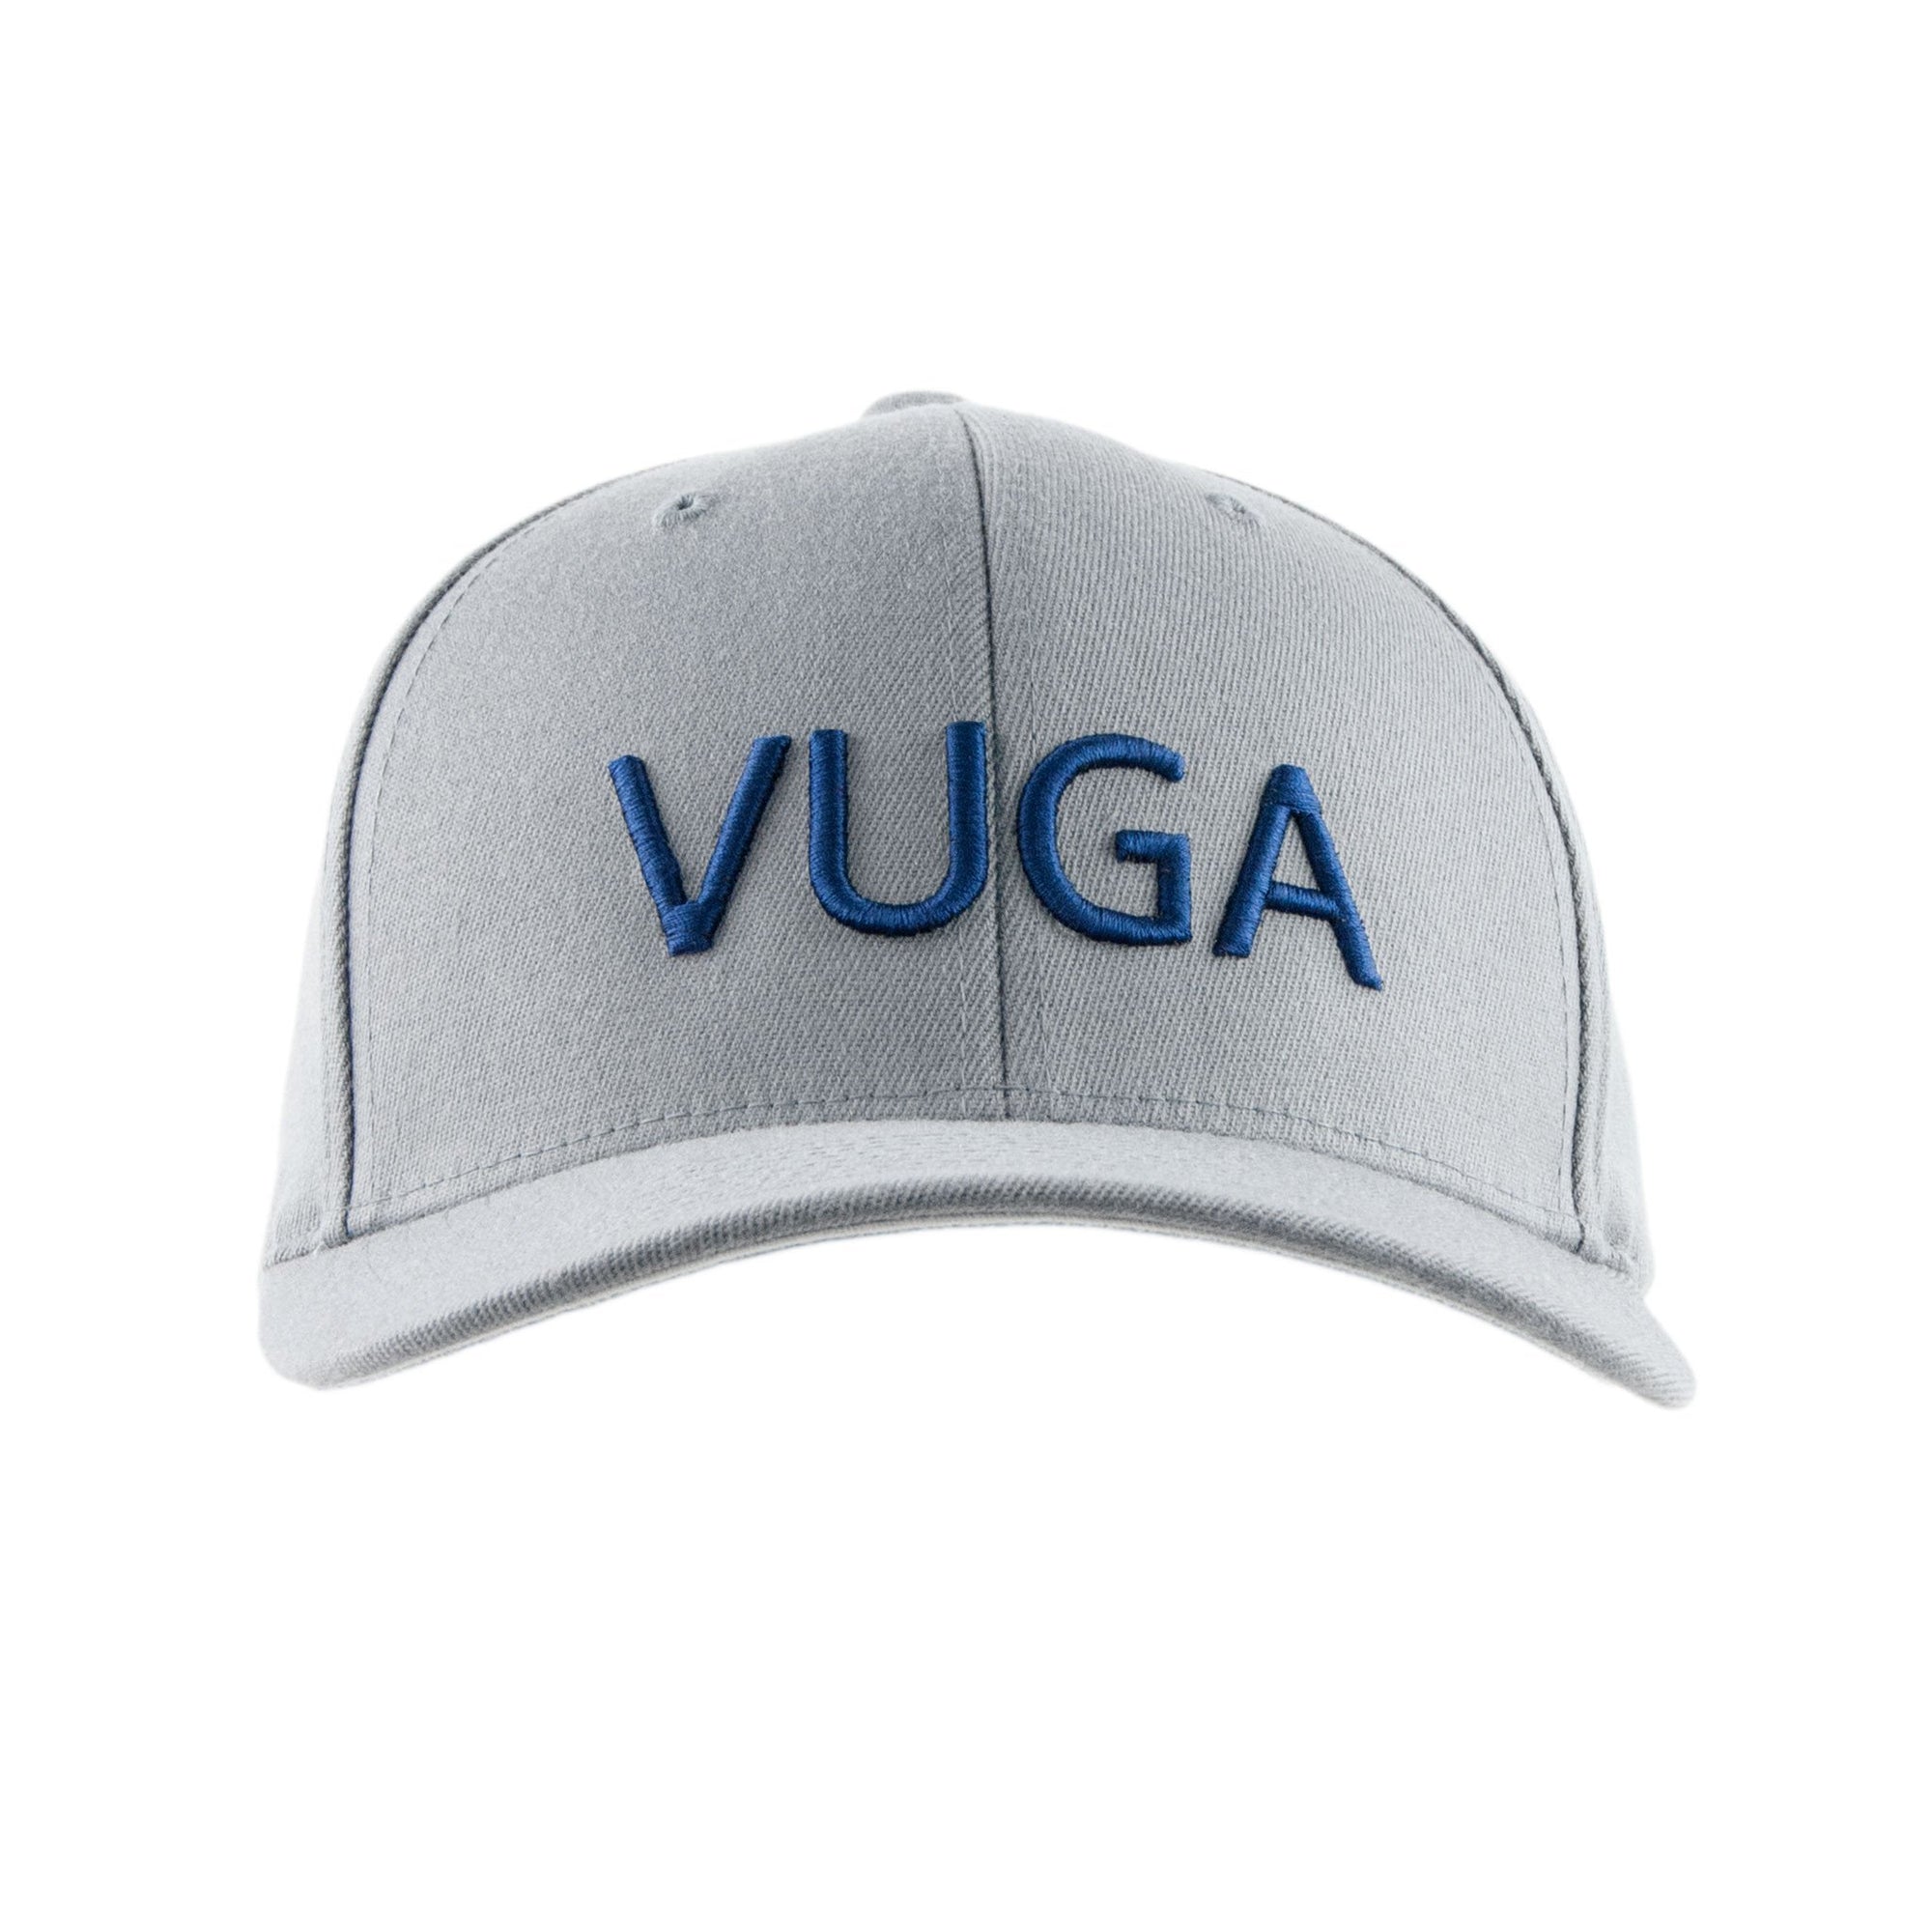 Front View of VUGA Hats - Blake Cap in Cool Grey